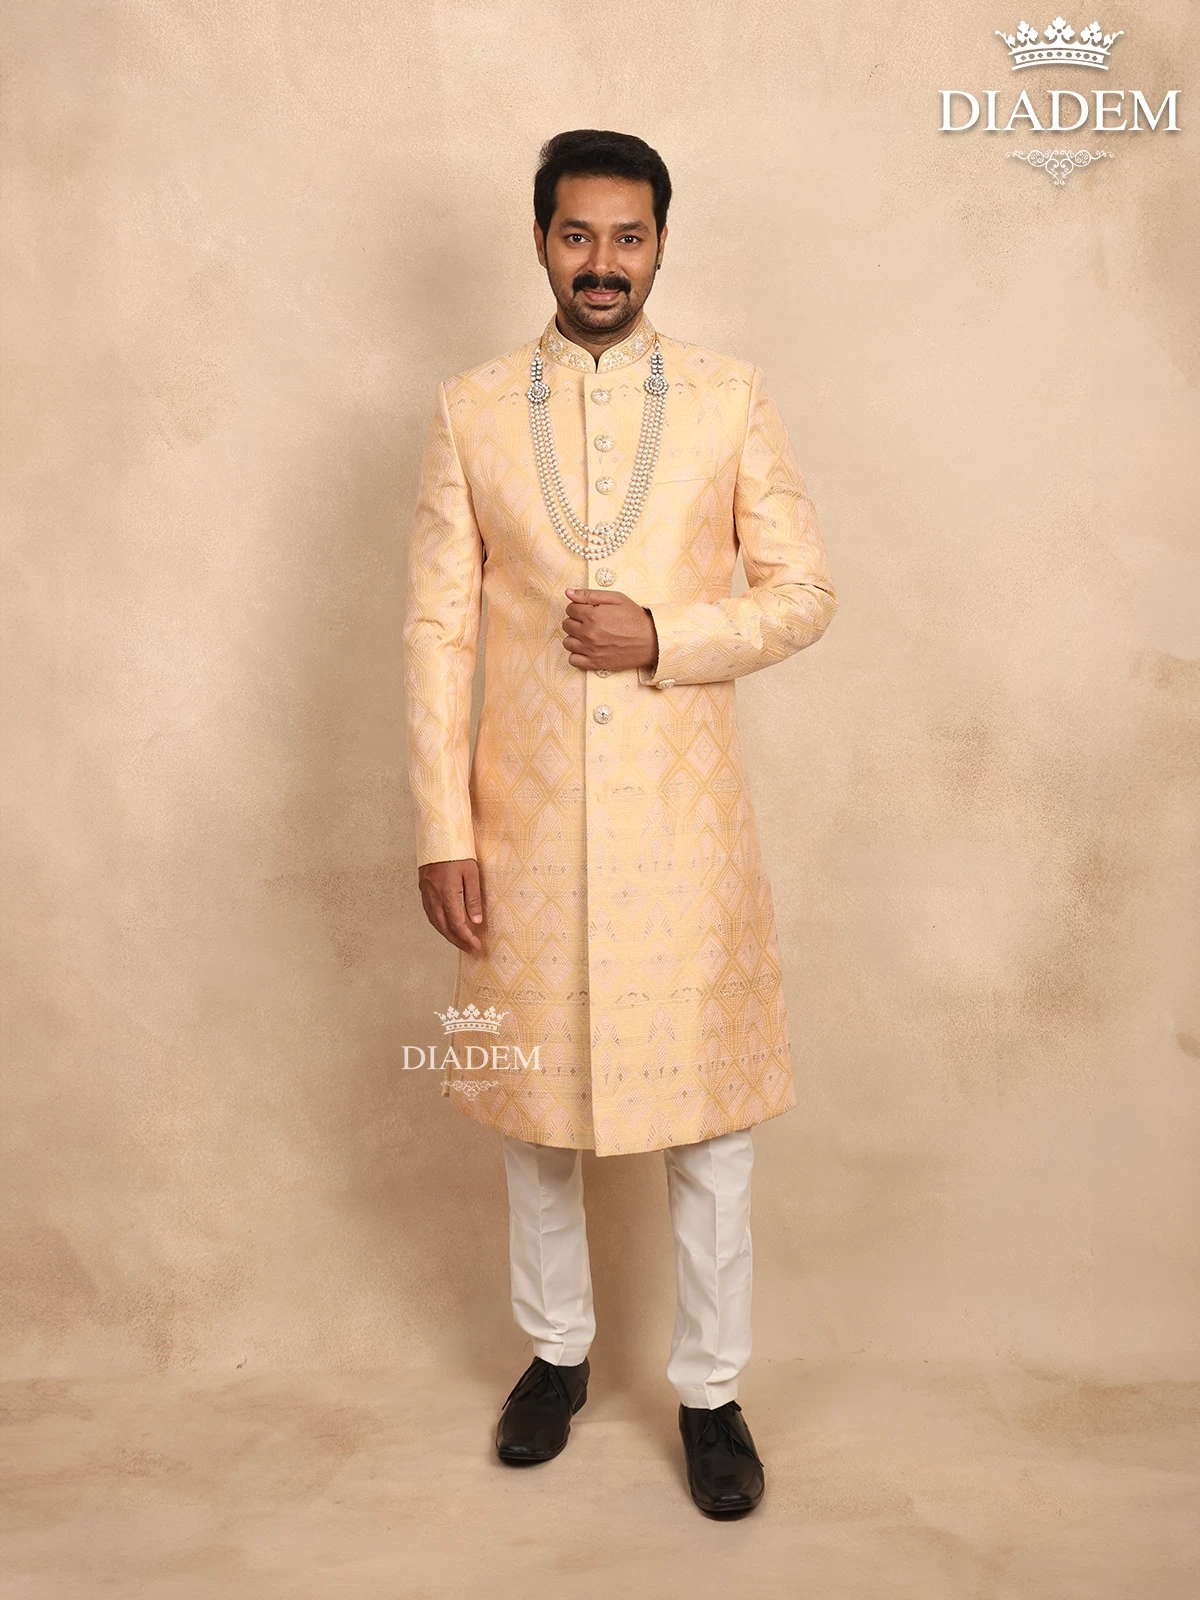 Sandal Jacquard Sherwani Suit Adorned with Embossed Details, Paired with Bead Mala